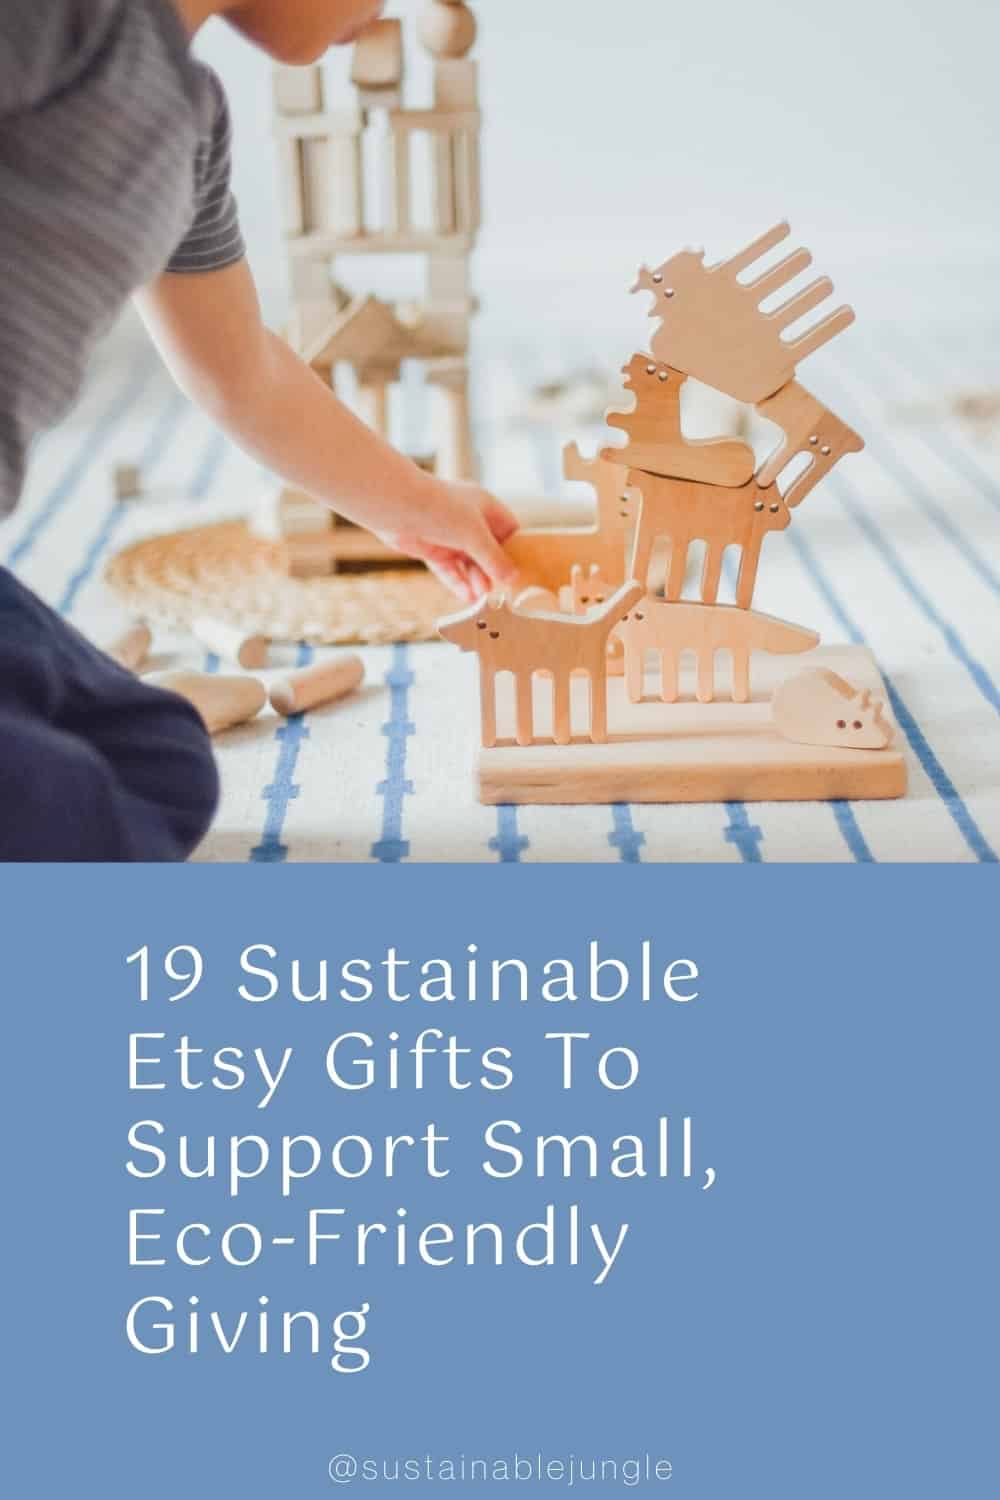 19 Sustainable Etsy Gifts To Support Small, Eco-Friendly Giving #sustainableetsygifts #bestsustainableetsygifts #sustainablechristmasetsygifts #ecofriendlyetsygifts #sustainablejungle Image by LisLis Toys